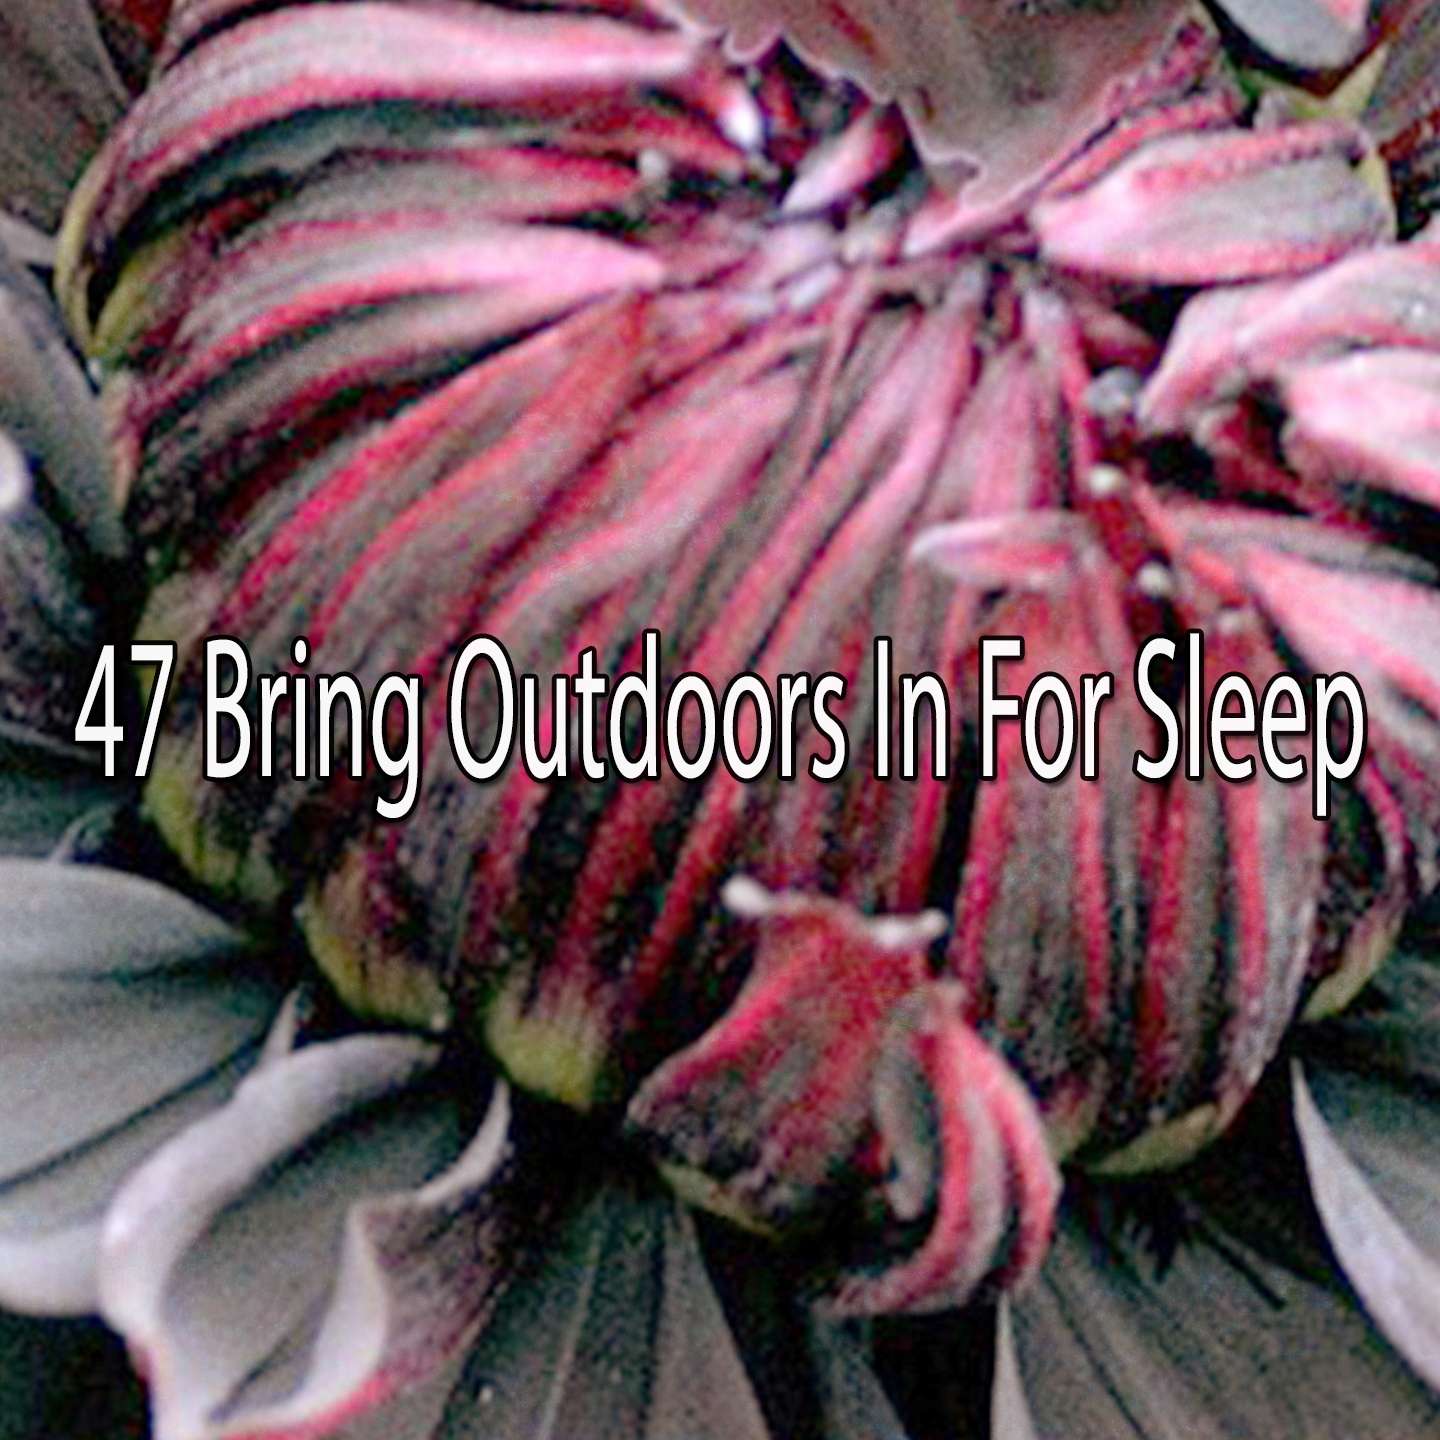 47 Bring Outdoors In For Sleep